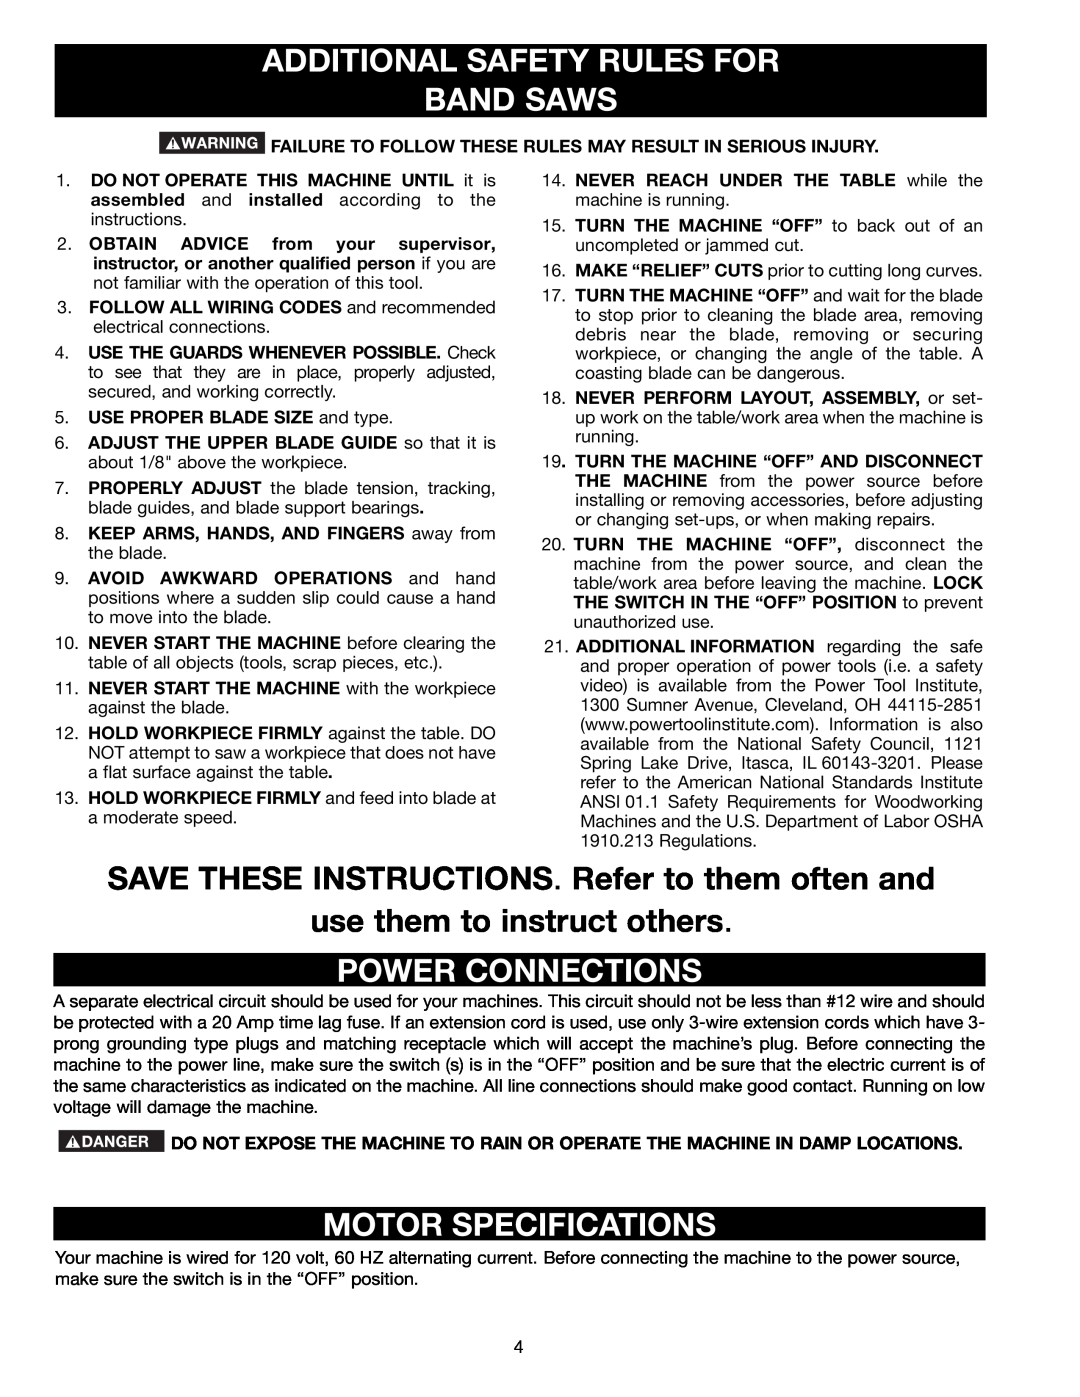 Delta BS150LS Additional Safety Rules For Band Saws, SAVE THESE INSTRUCTIONS. Refer to them often and, Power Connections 